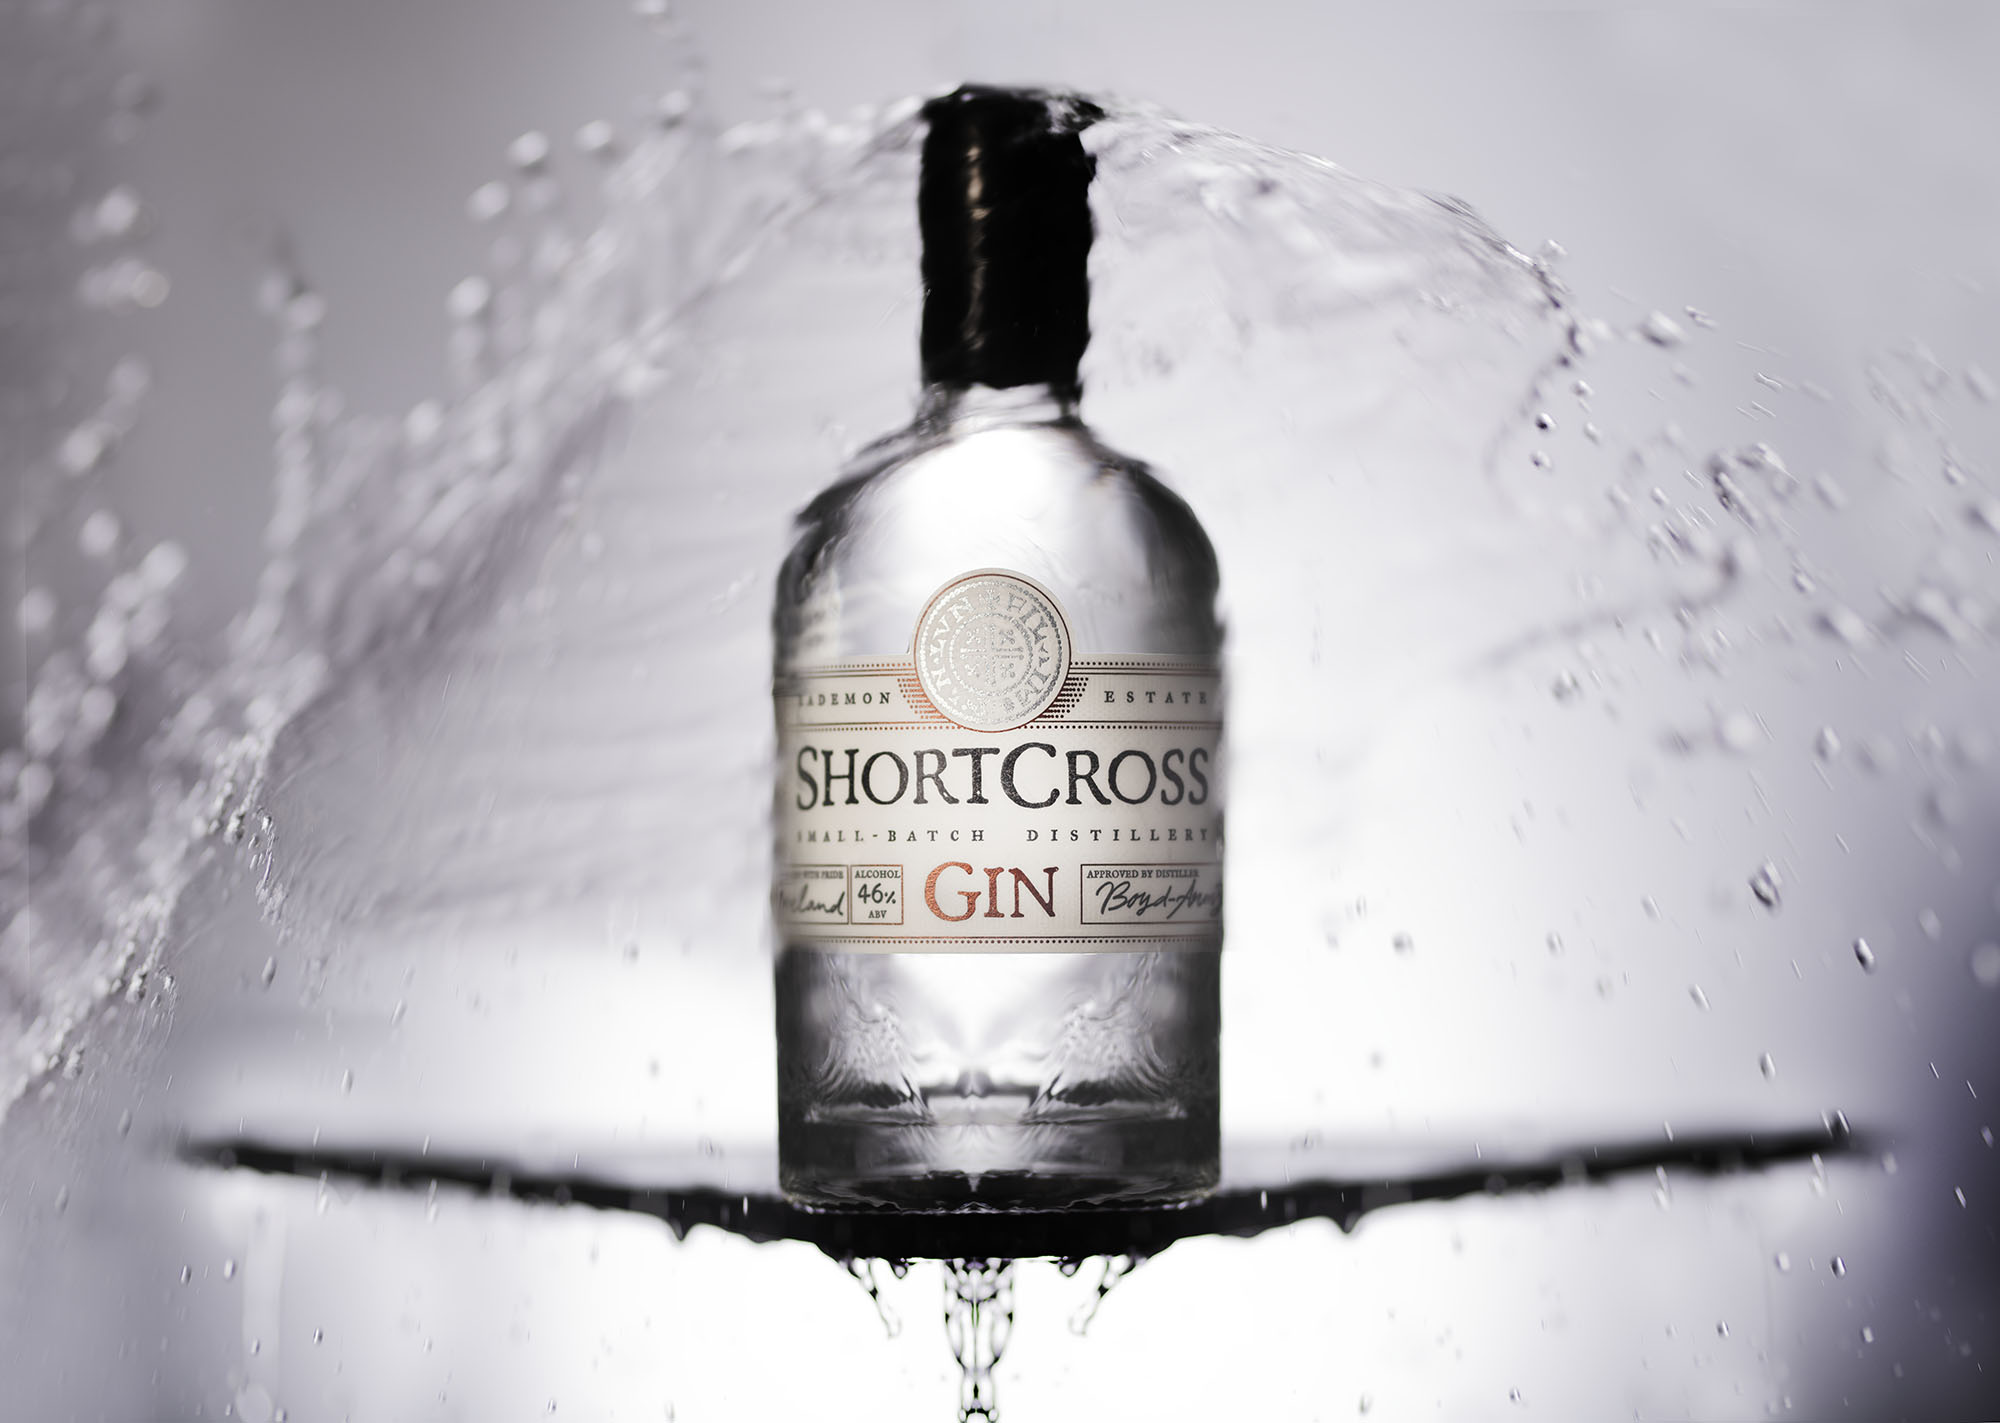 Shortcross Gin launches in the LCBO Canada